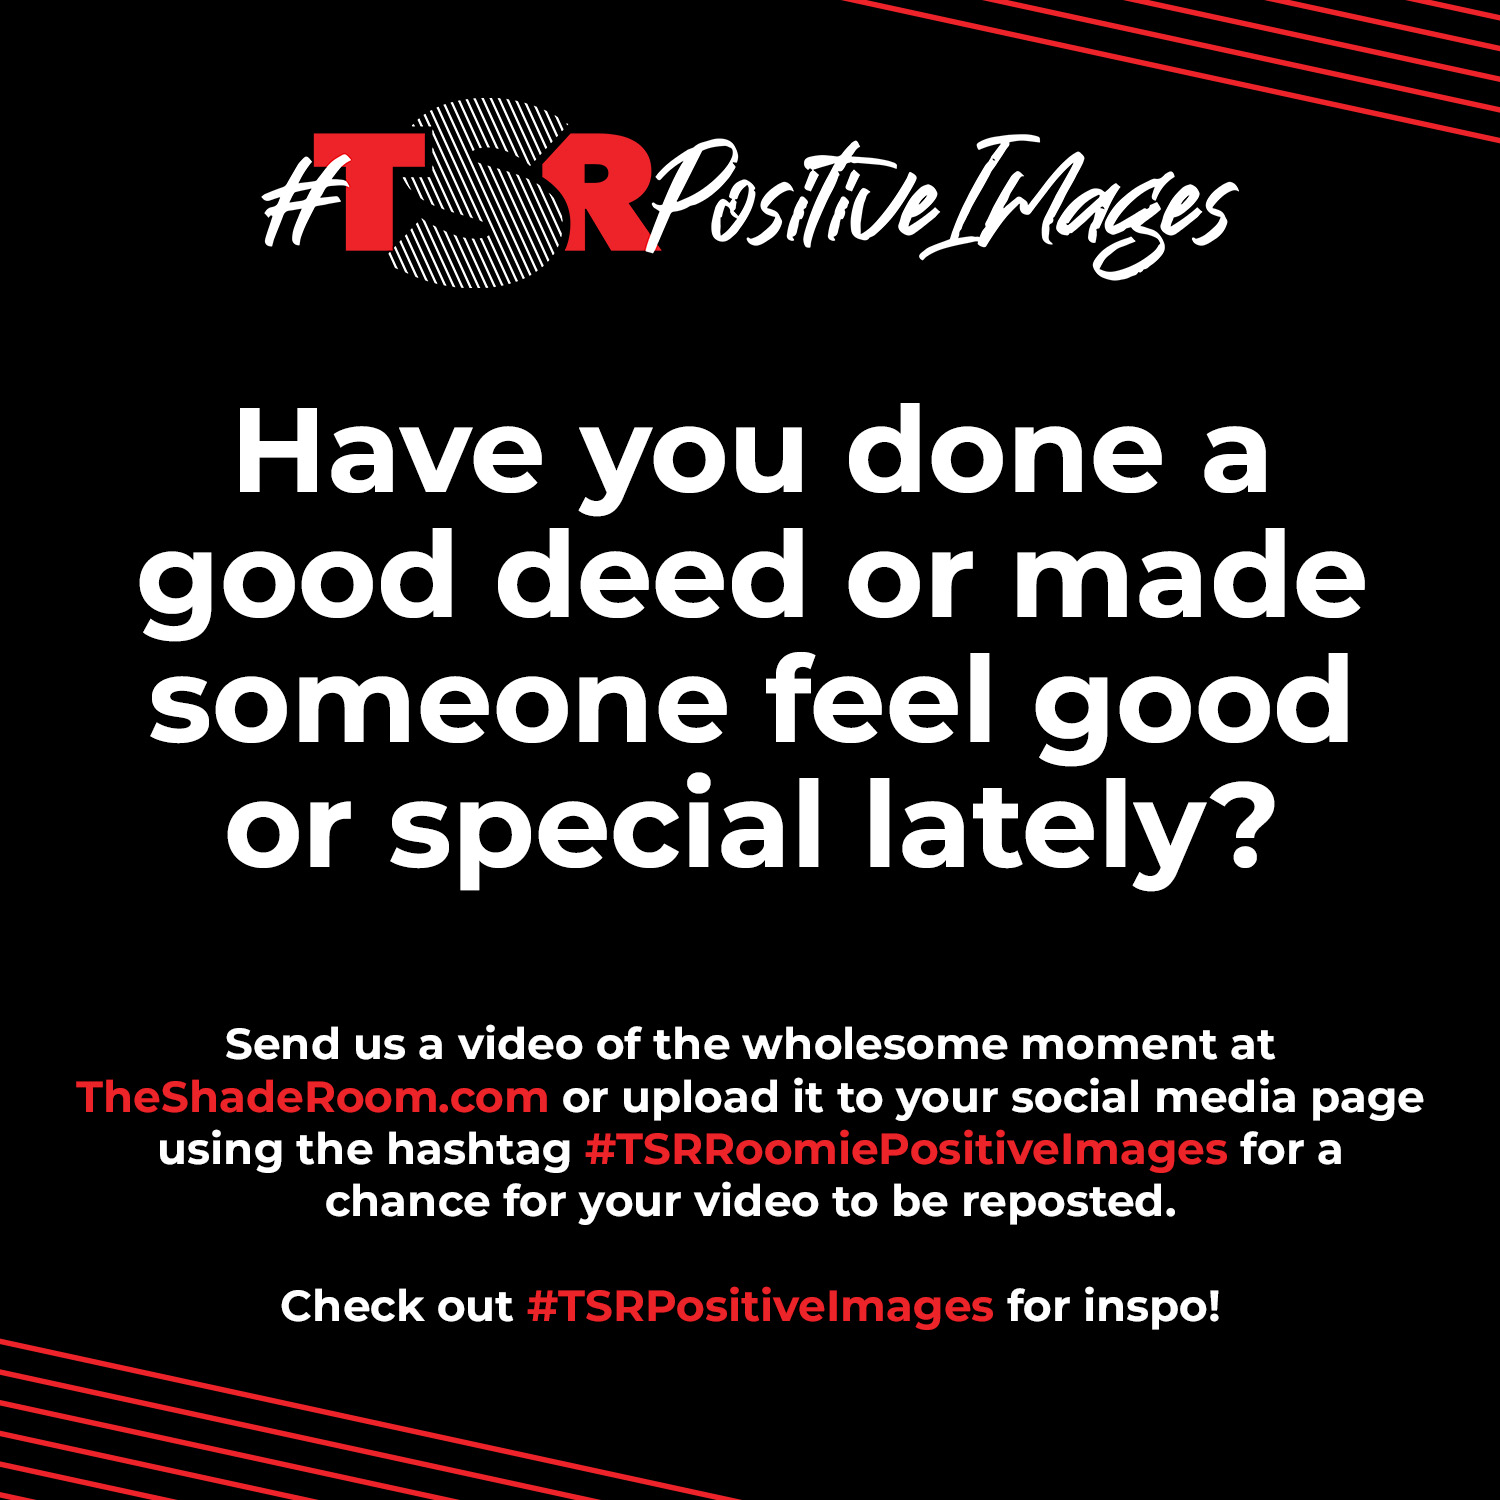 Have A Feel-Good Story Tip or Video? Submit A #TSRPositiveImages Video Here!